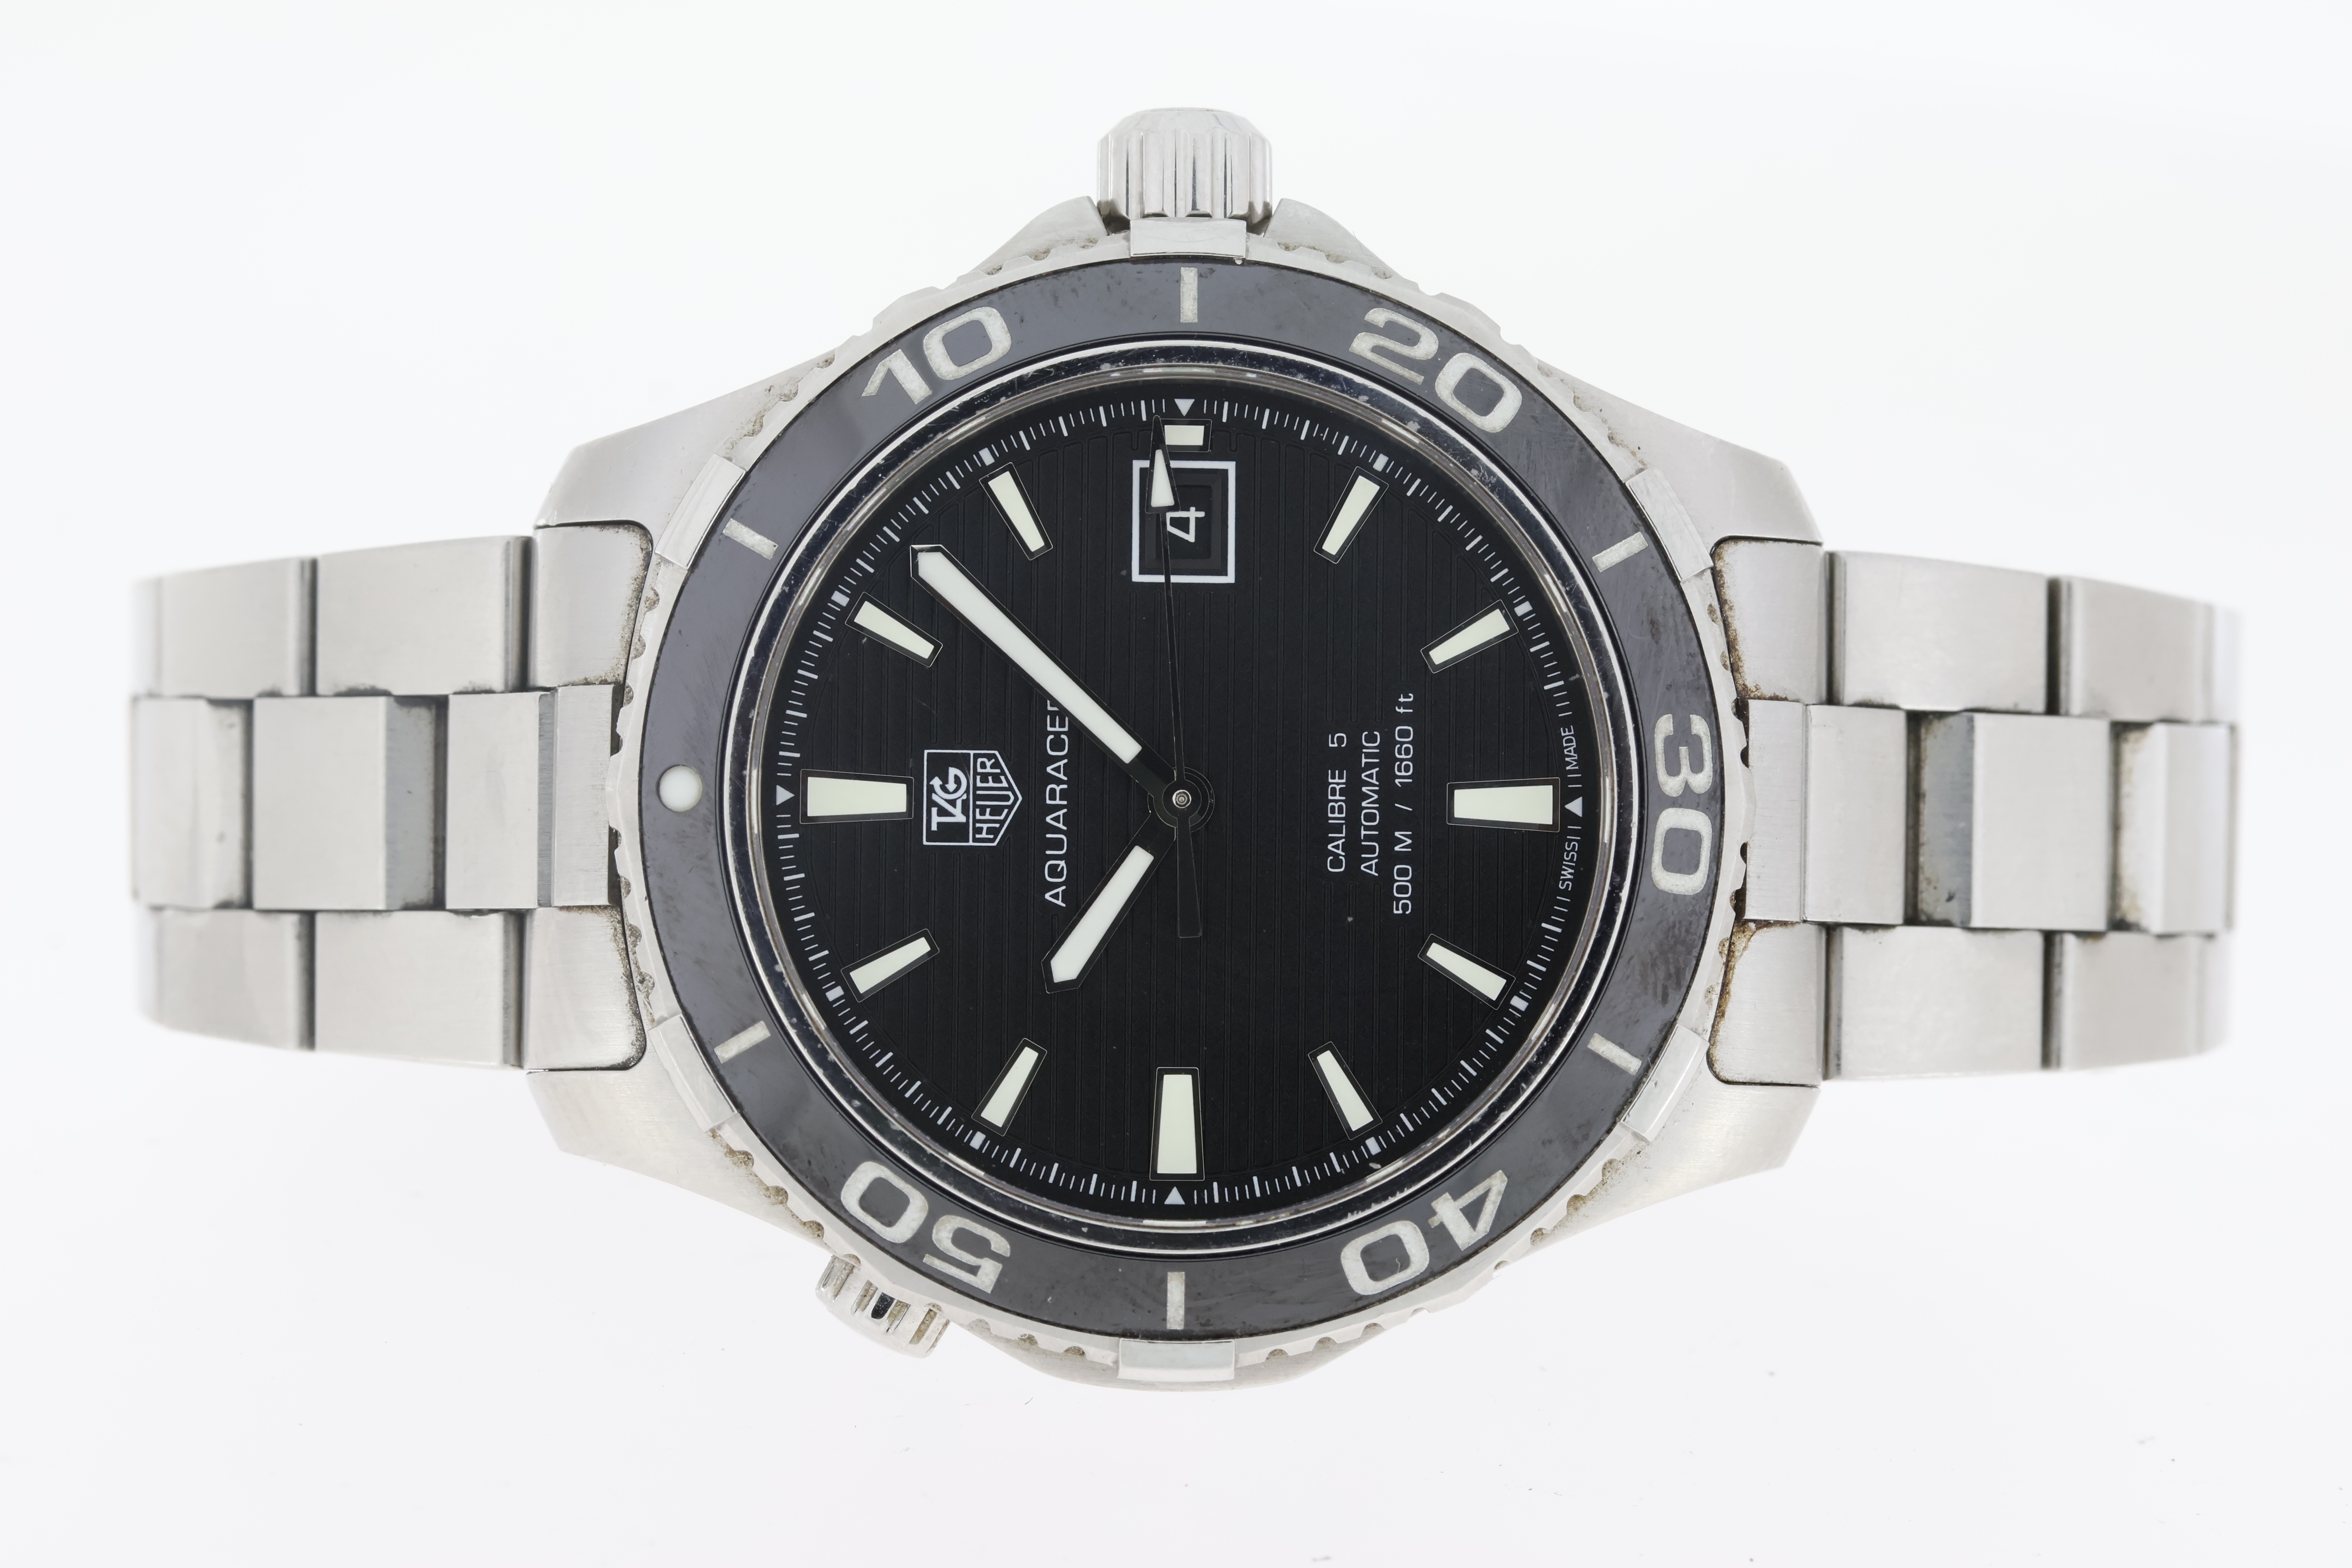 Tag Heuer Aquaracer Date Automatic Box and Papers 2013 - Image 2 of 5